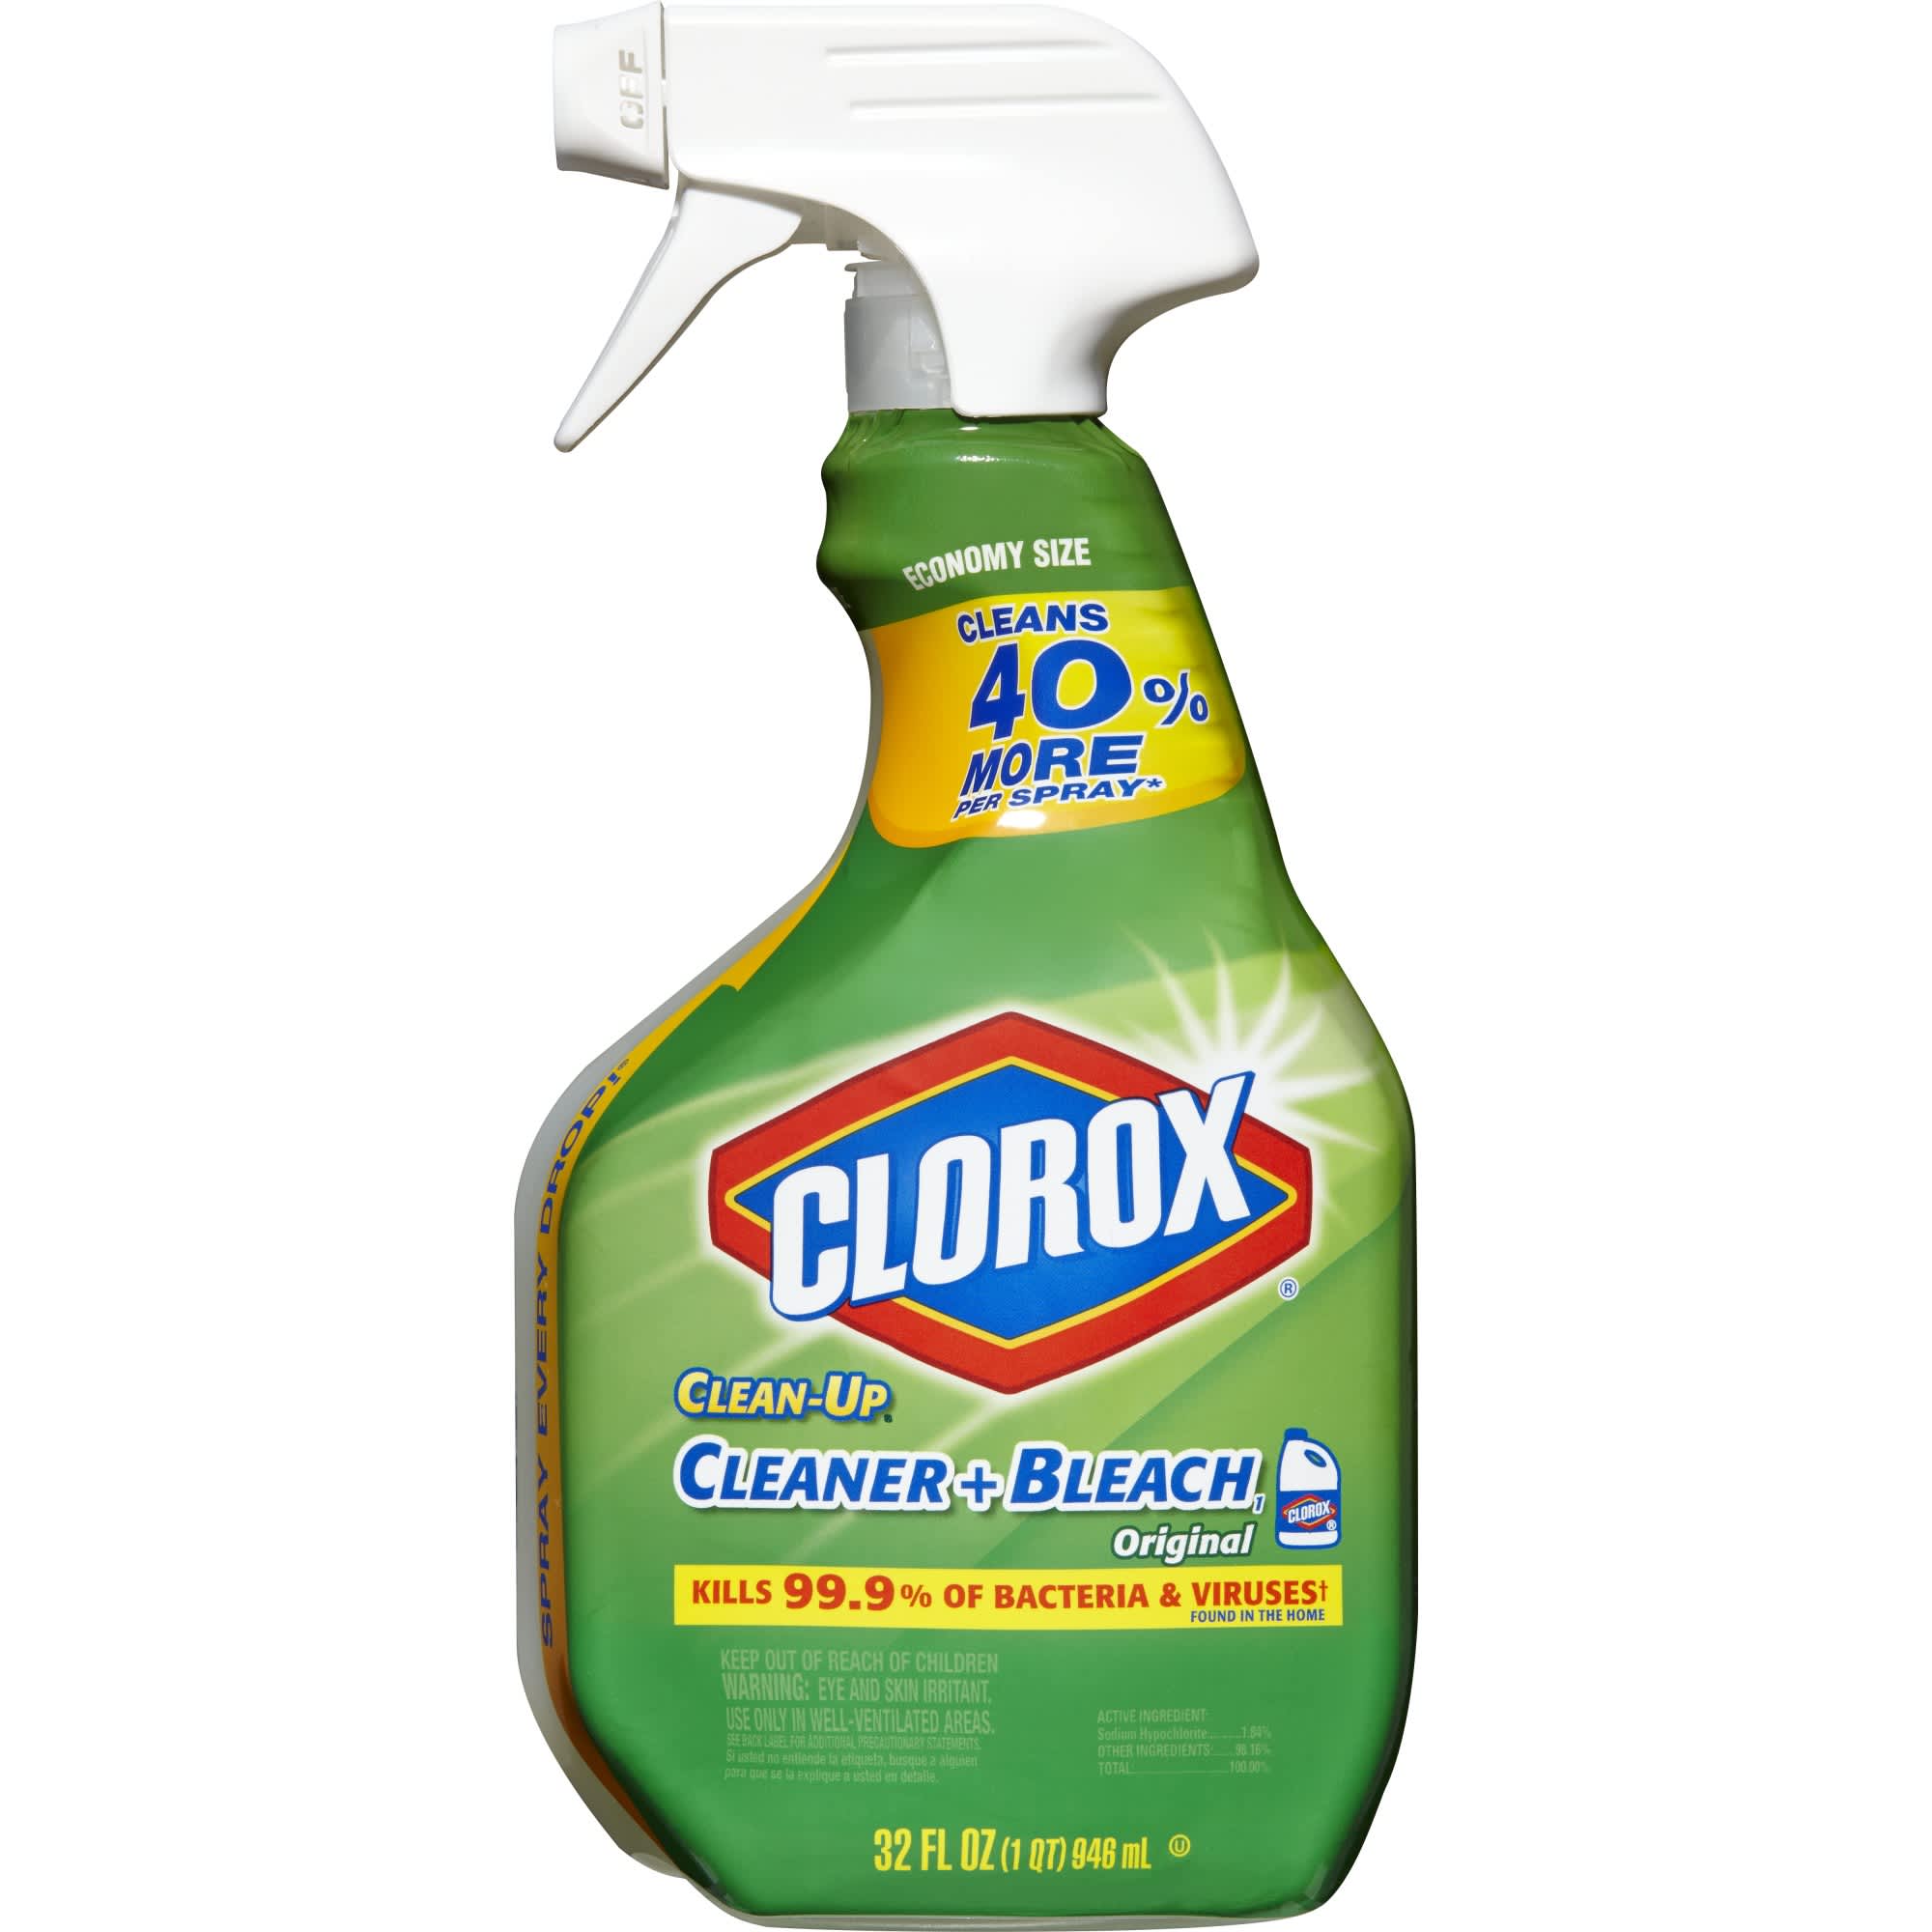 https://cdn.apartmenttherapy.info/image/upload/v1617203552/gen-workflow/product-database/clorox_cleanup_cleaner.jpg